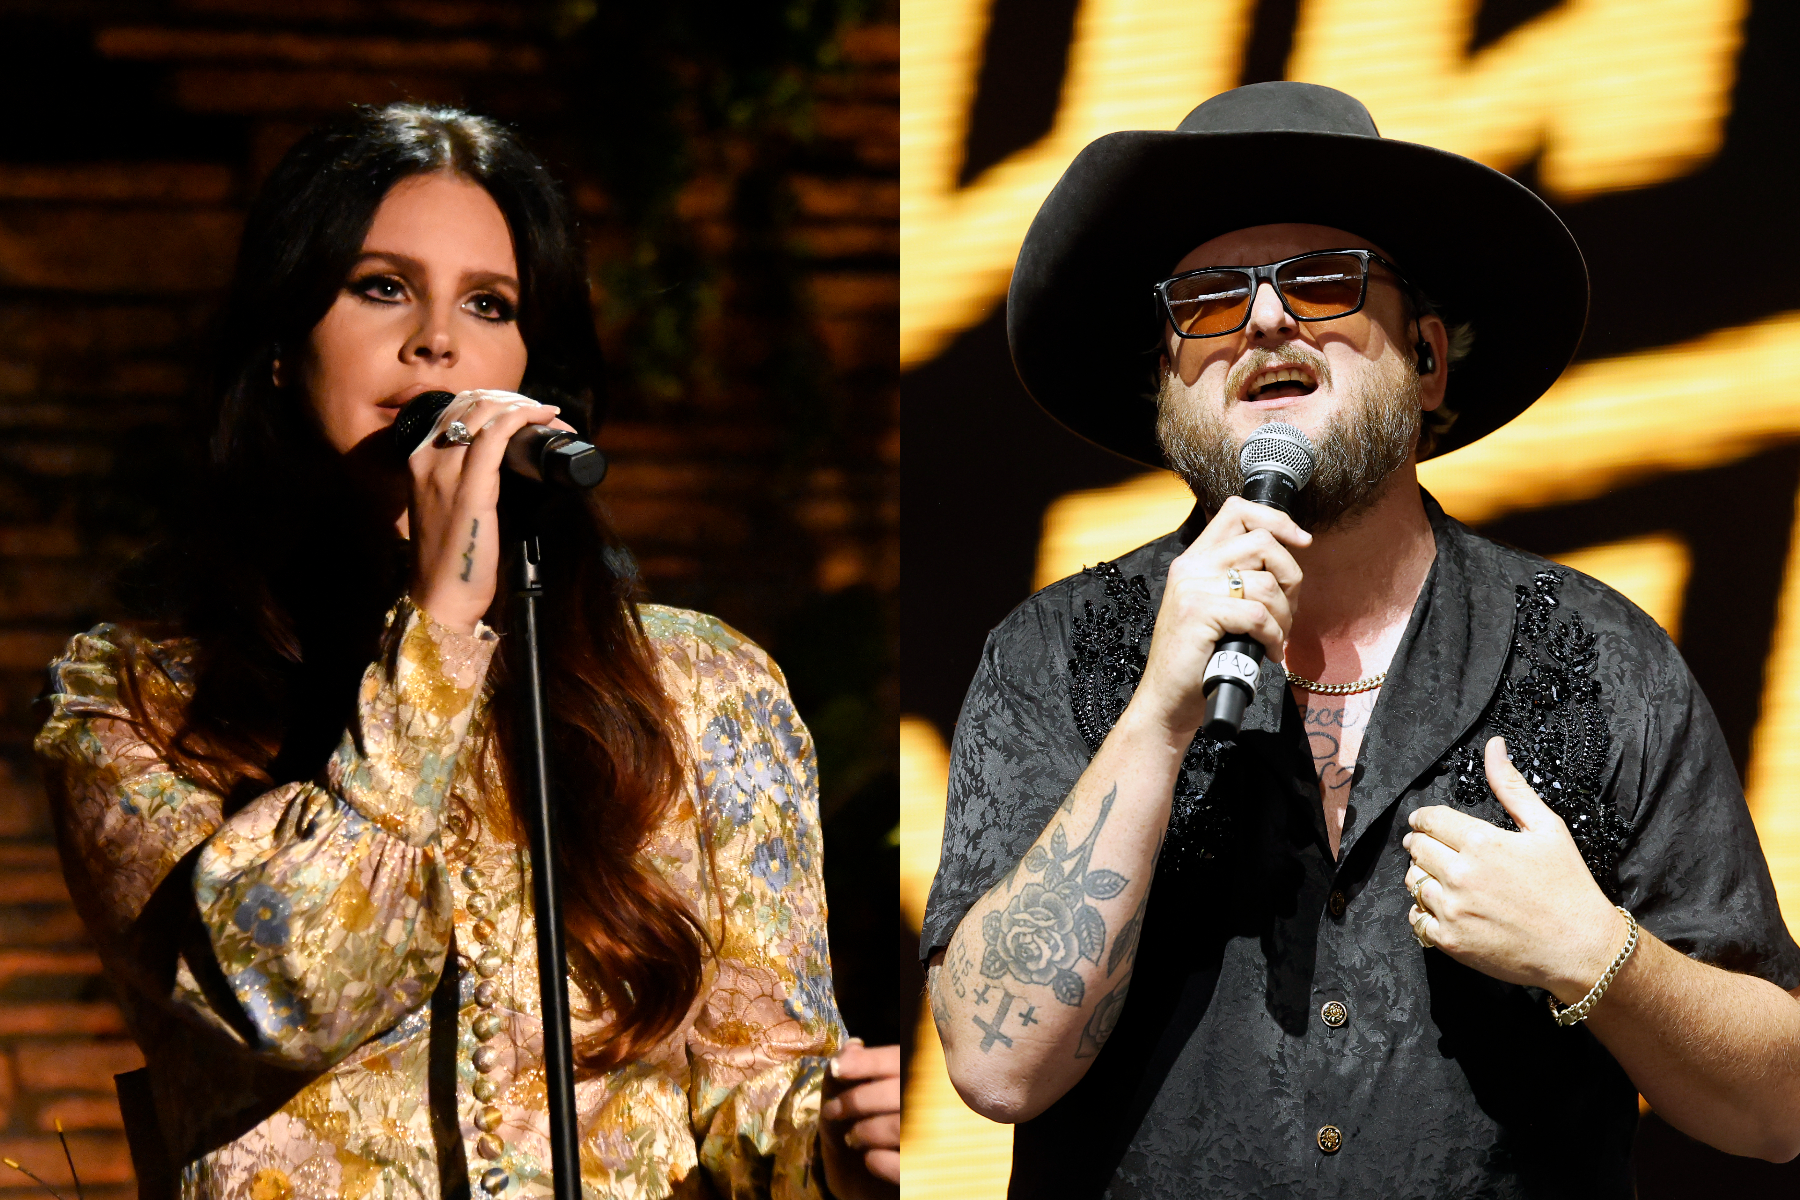 Lana Del Rey Joins Paul Cauthen for ‘Unchained Melody’ Duet at Stagecoach